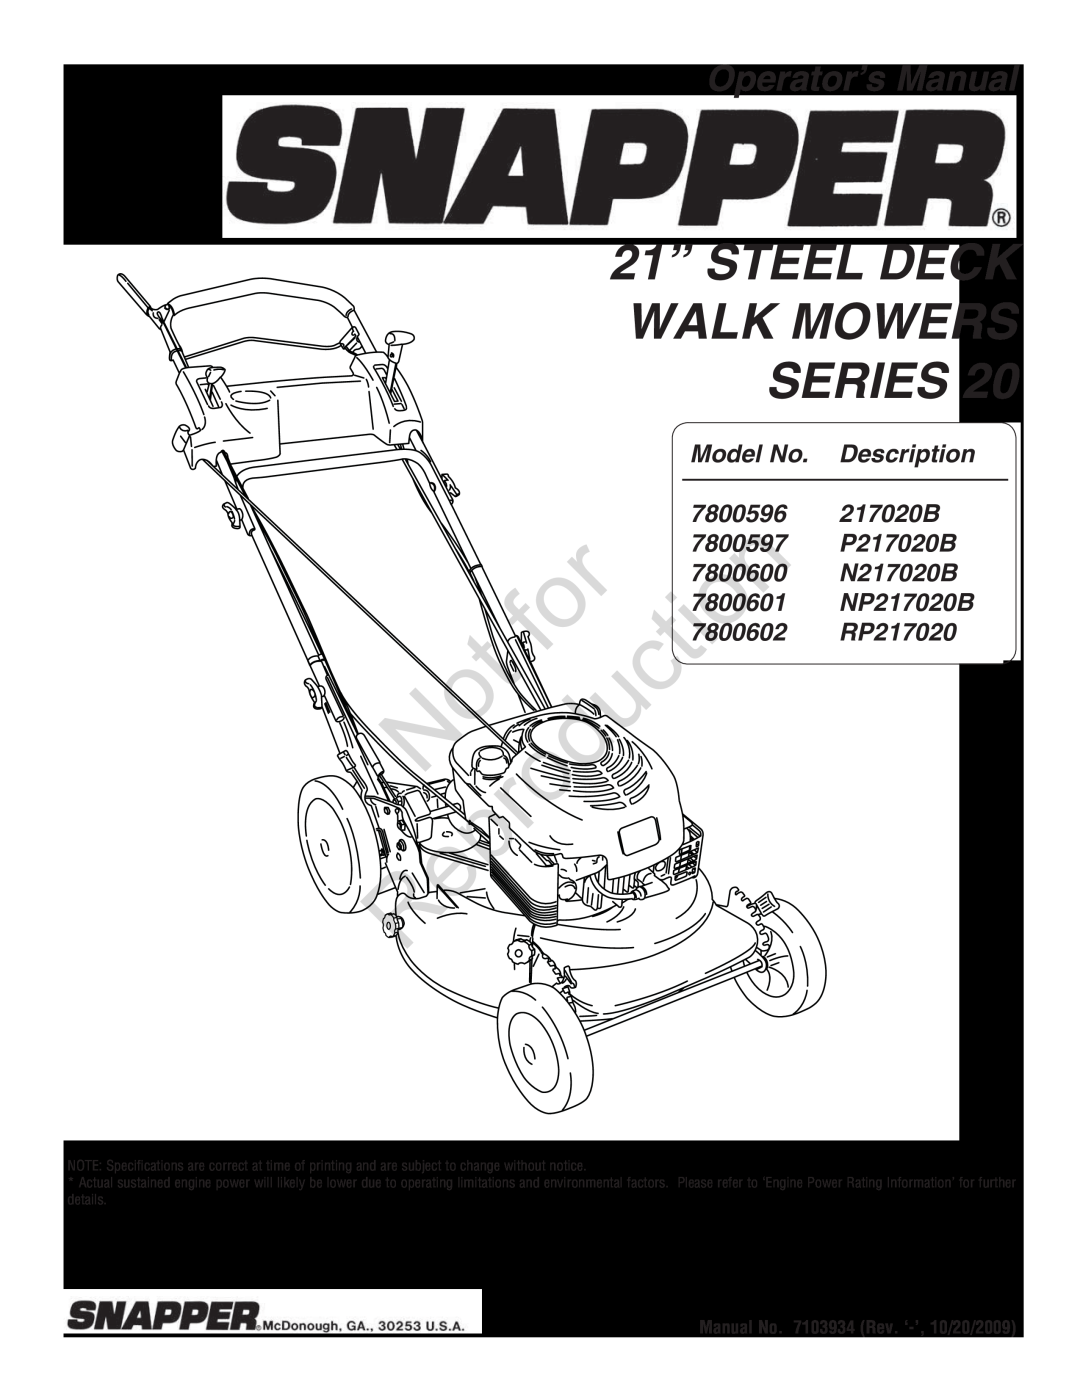 Snapper 7800602 specifications 21” STEEL DECK WALK MOWERS SERIES, Reproduction, Operator’s Manual, Model No, 7800596 